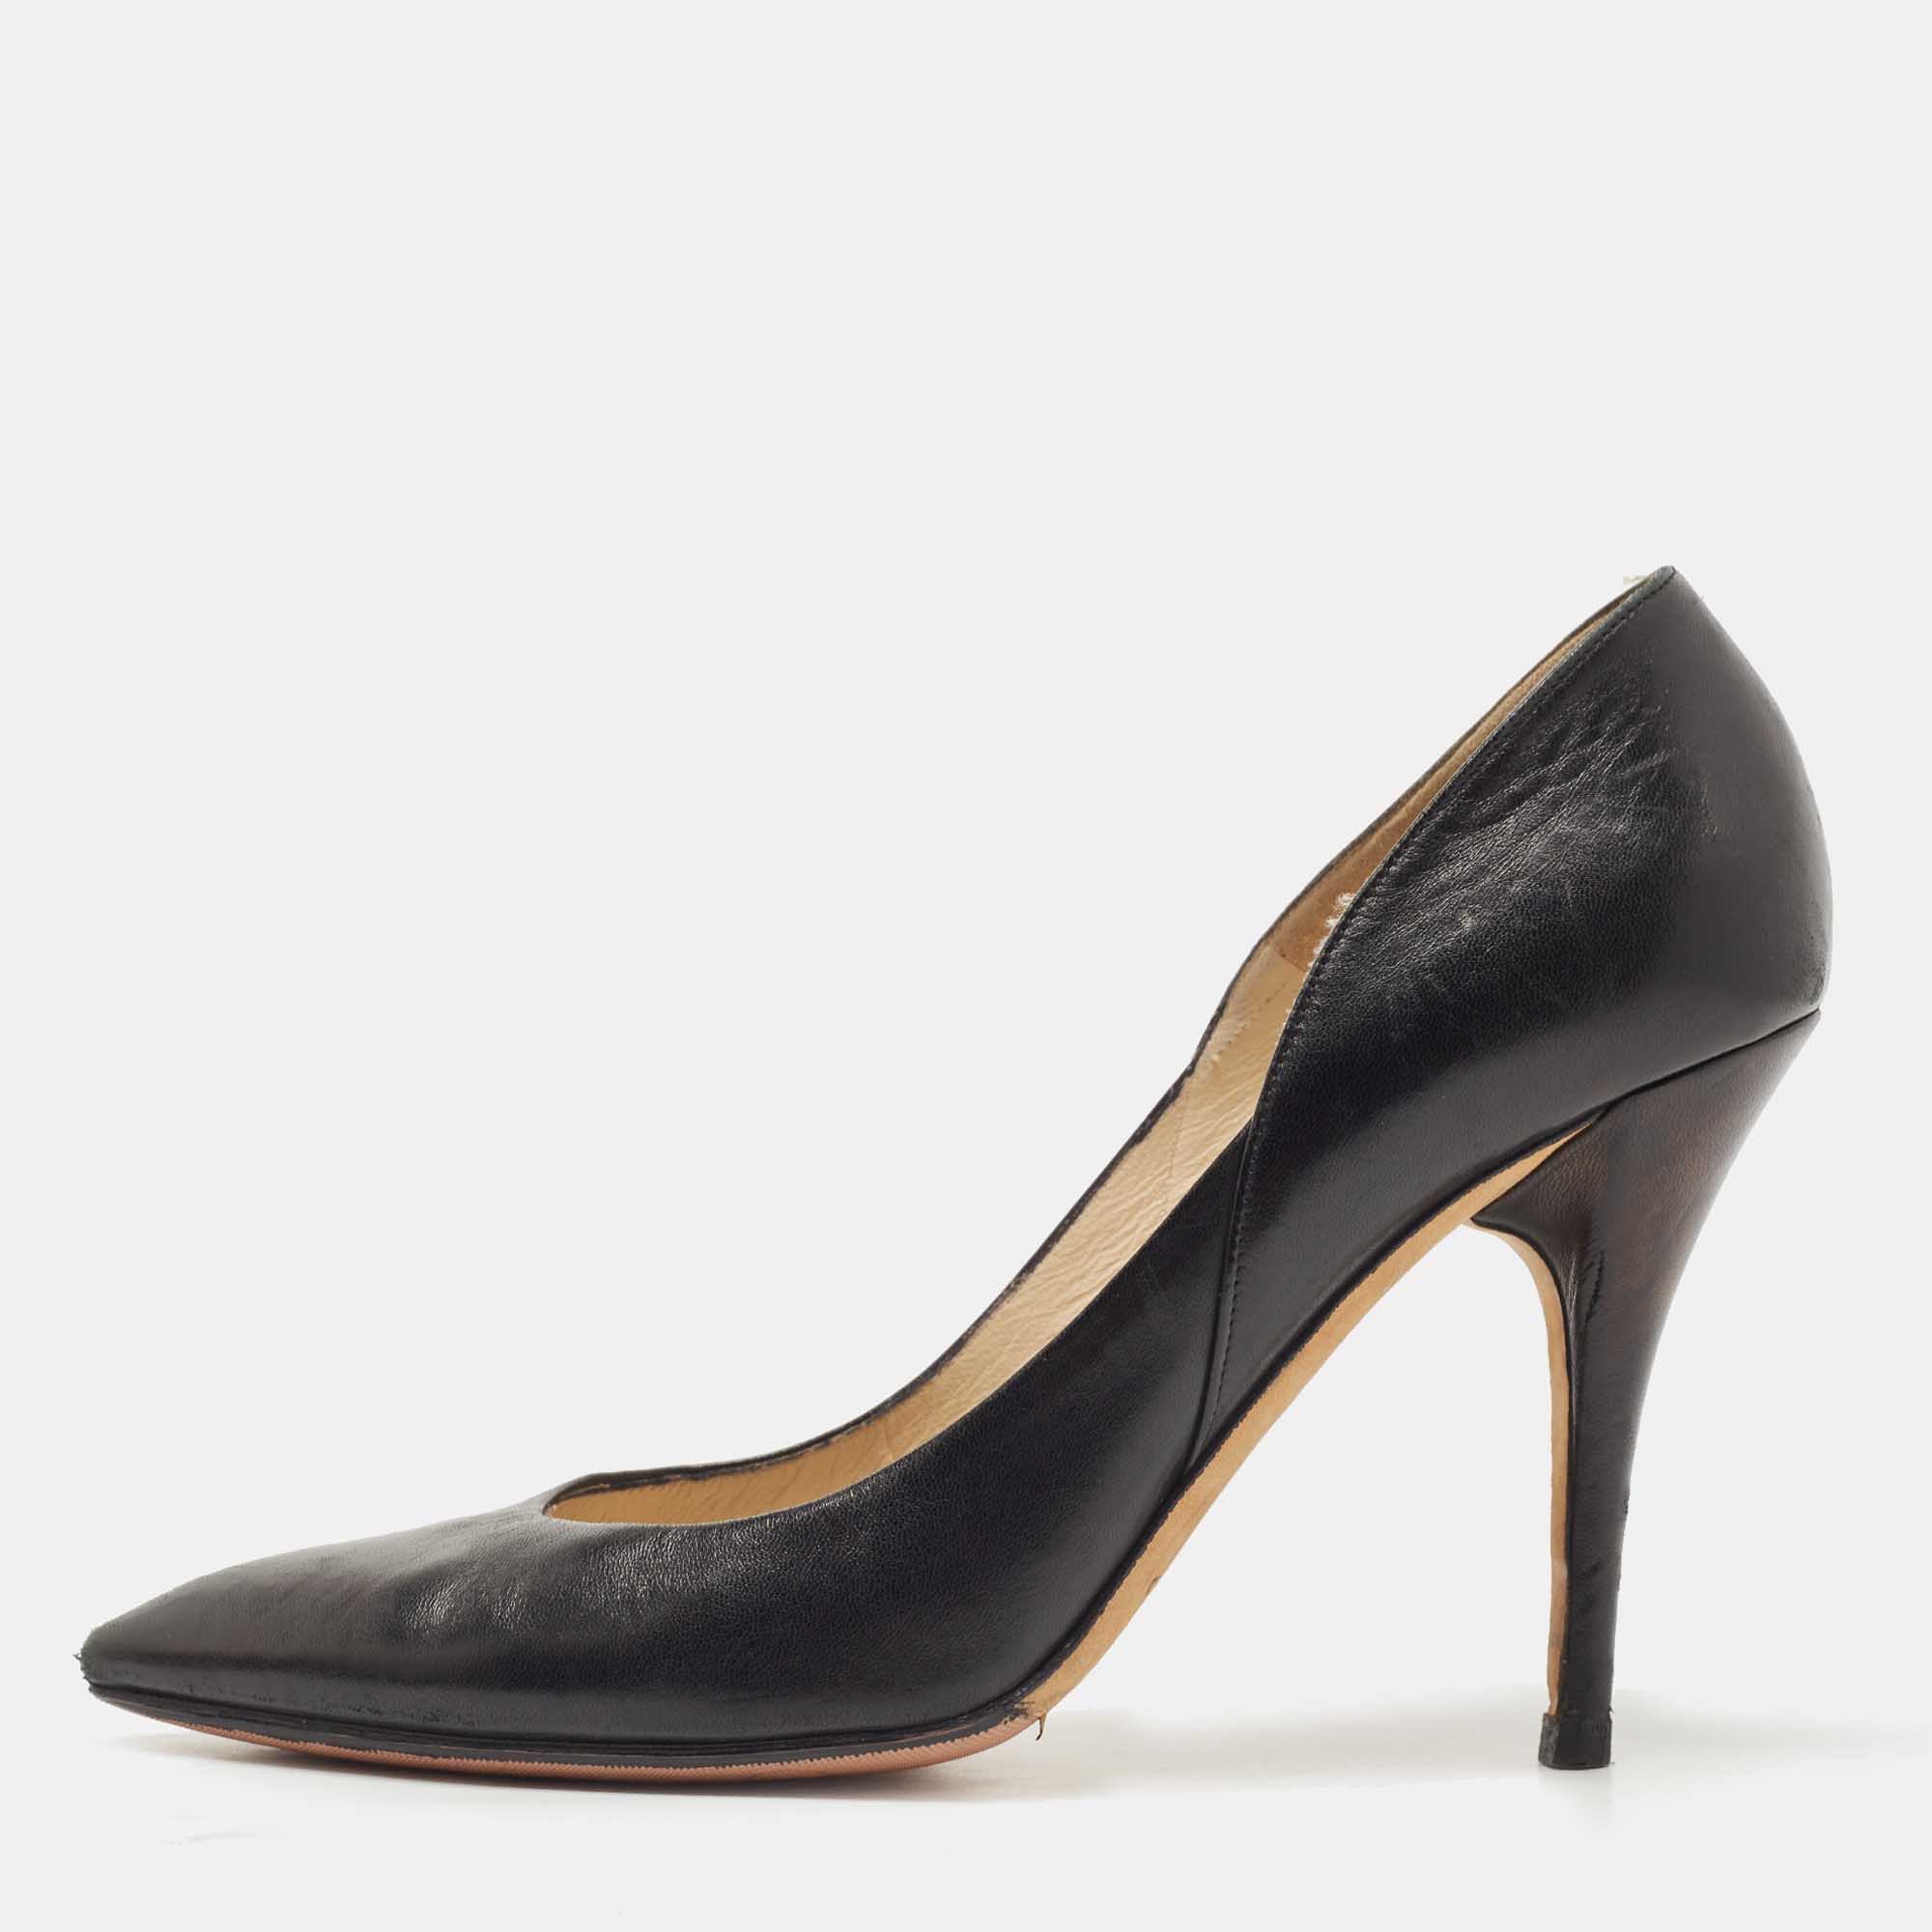 Jimmy choo black leather pointed toe pumps size 40